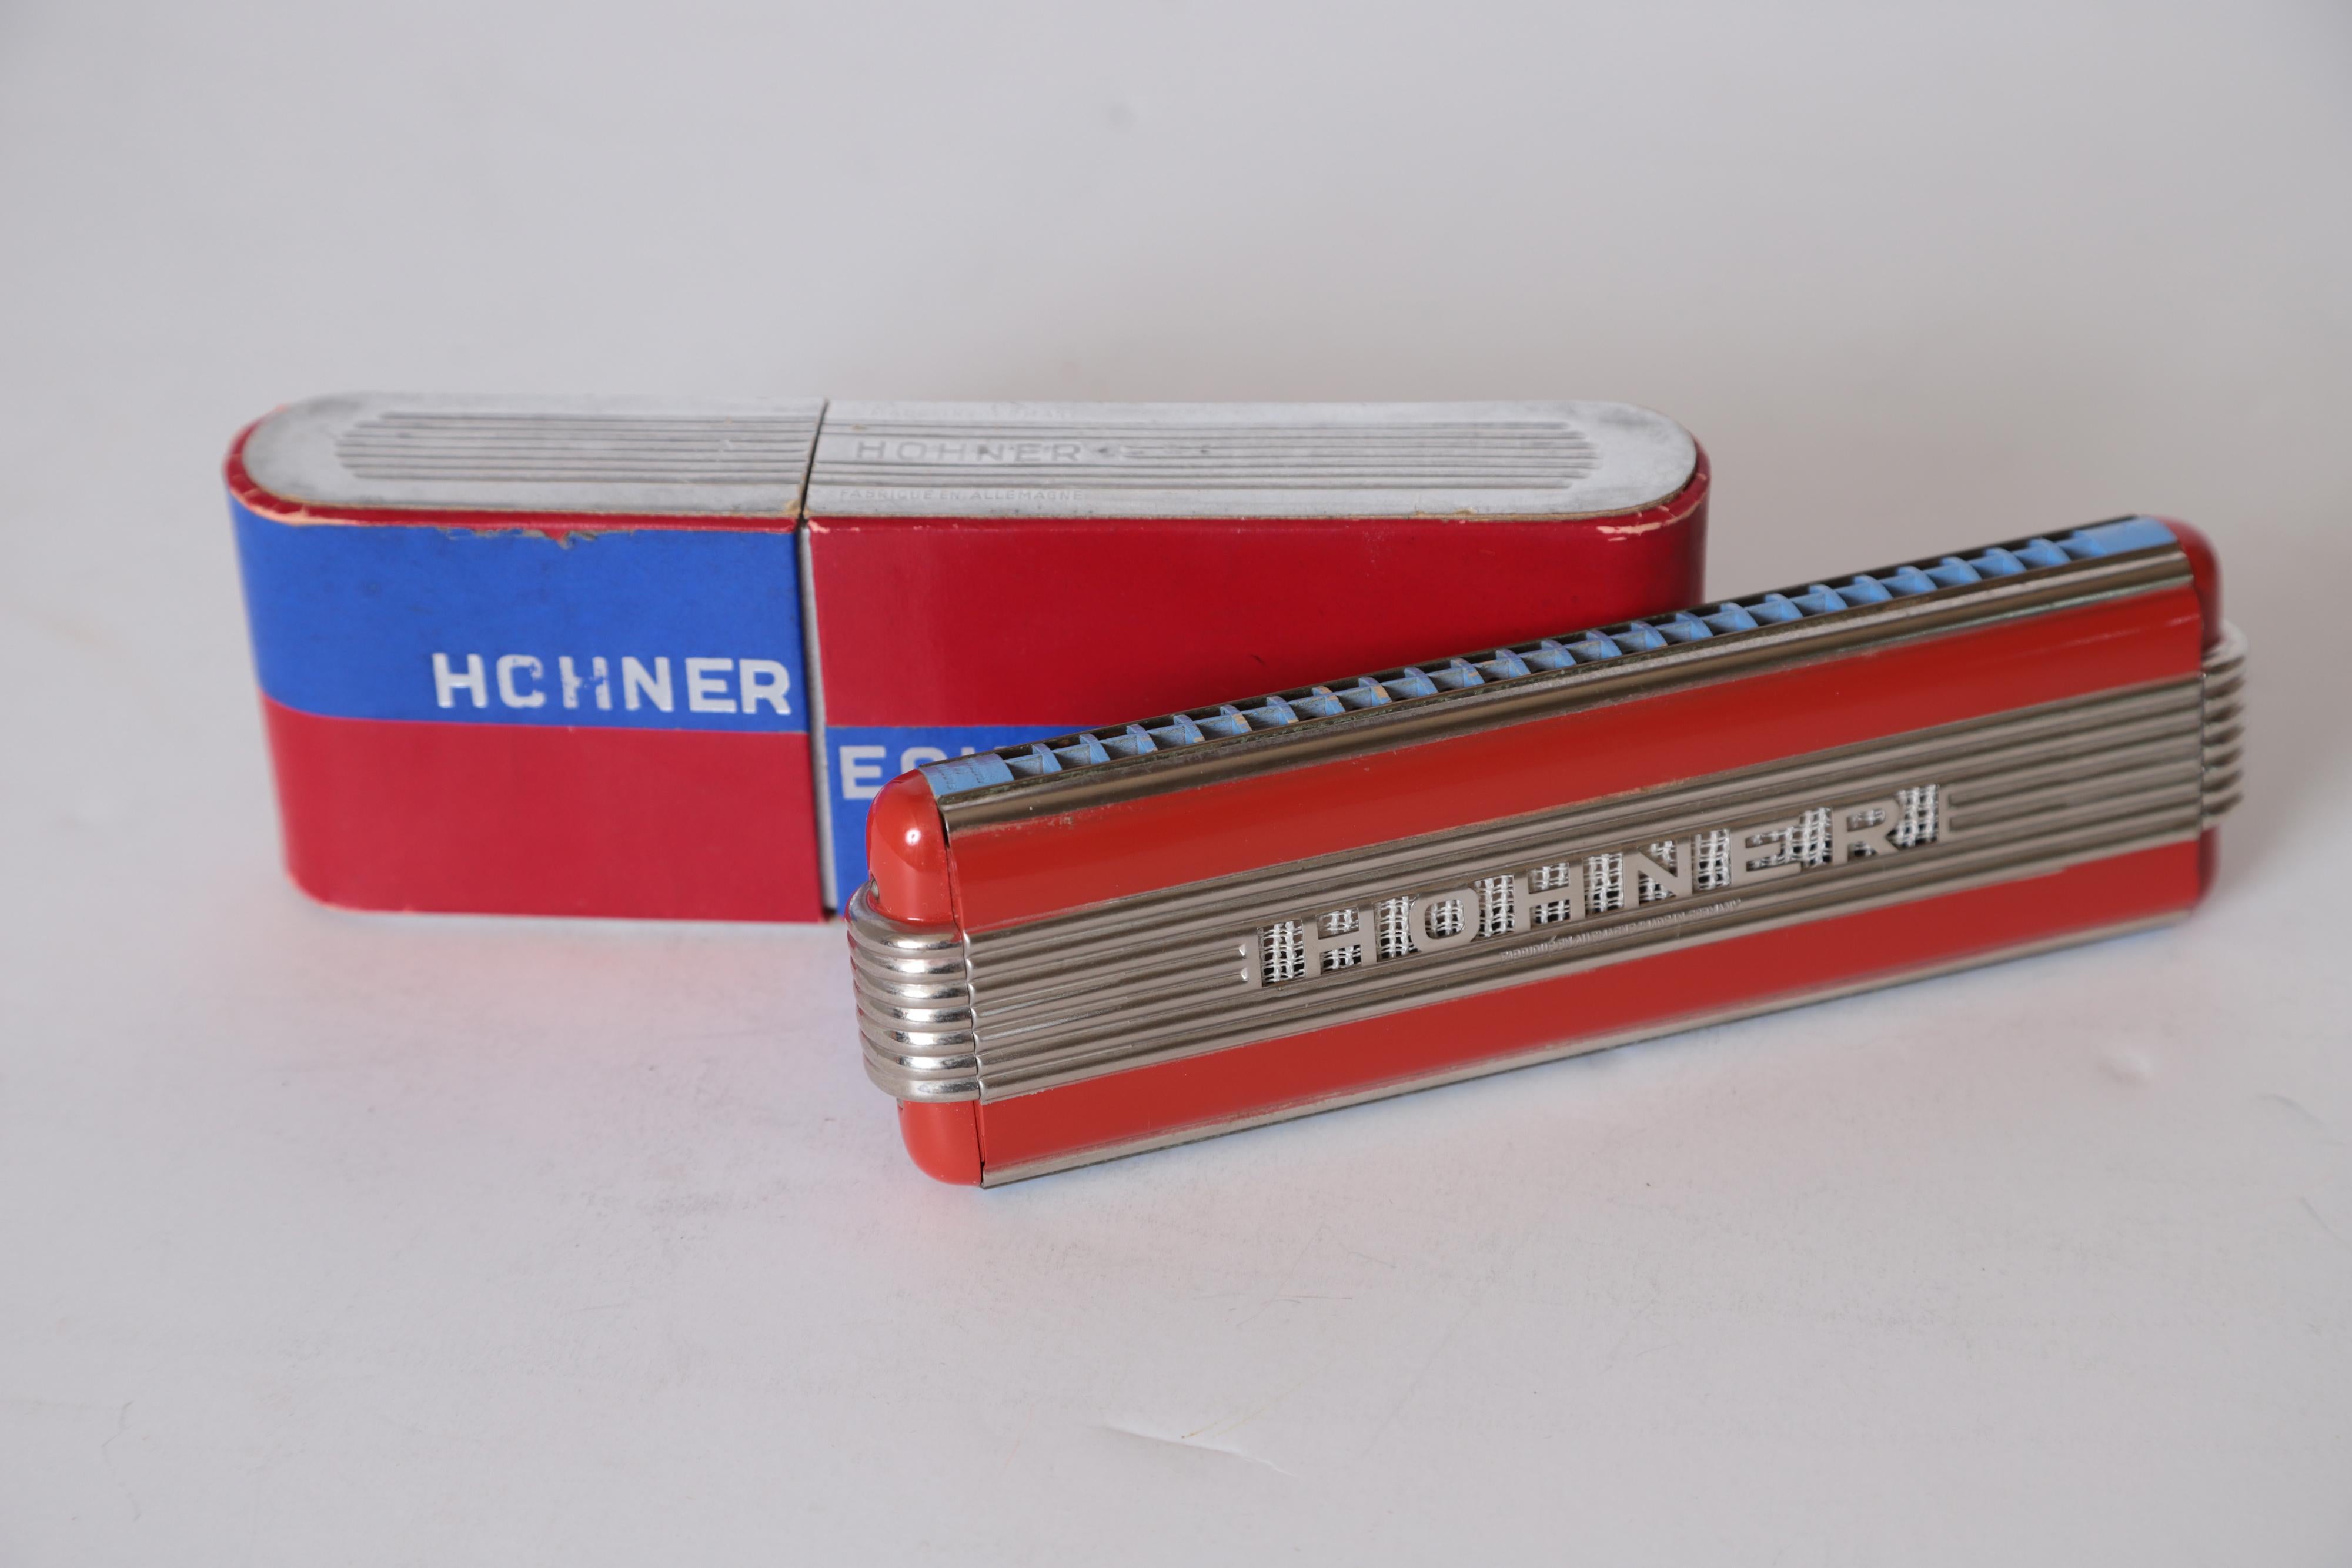 Art Deco Machine Age John Vassos streamline Harmonica for Hohner, circa 1936

Near Mint, in original box.
These are very cool. Great Vassos original patented design.

The red and chrome Echo Elite harmonica was made in three sizes and in